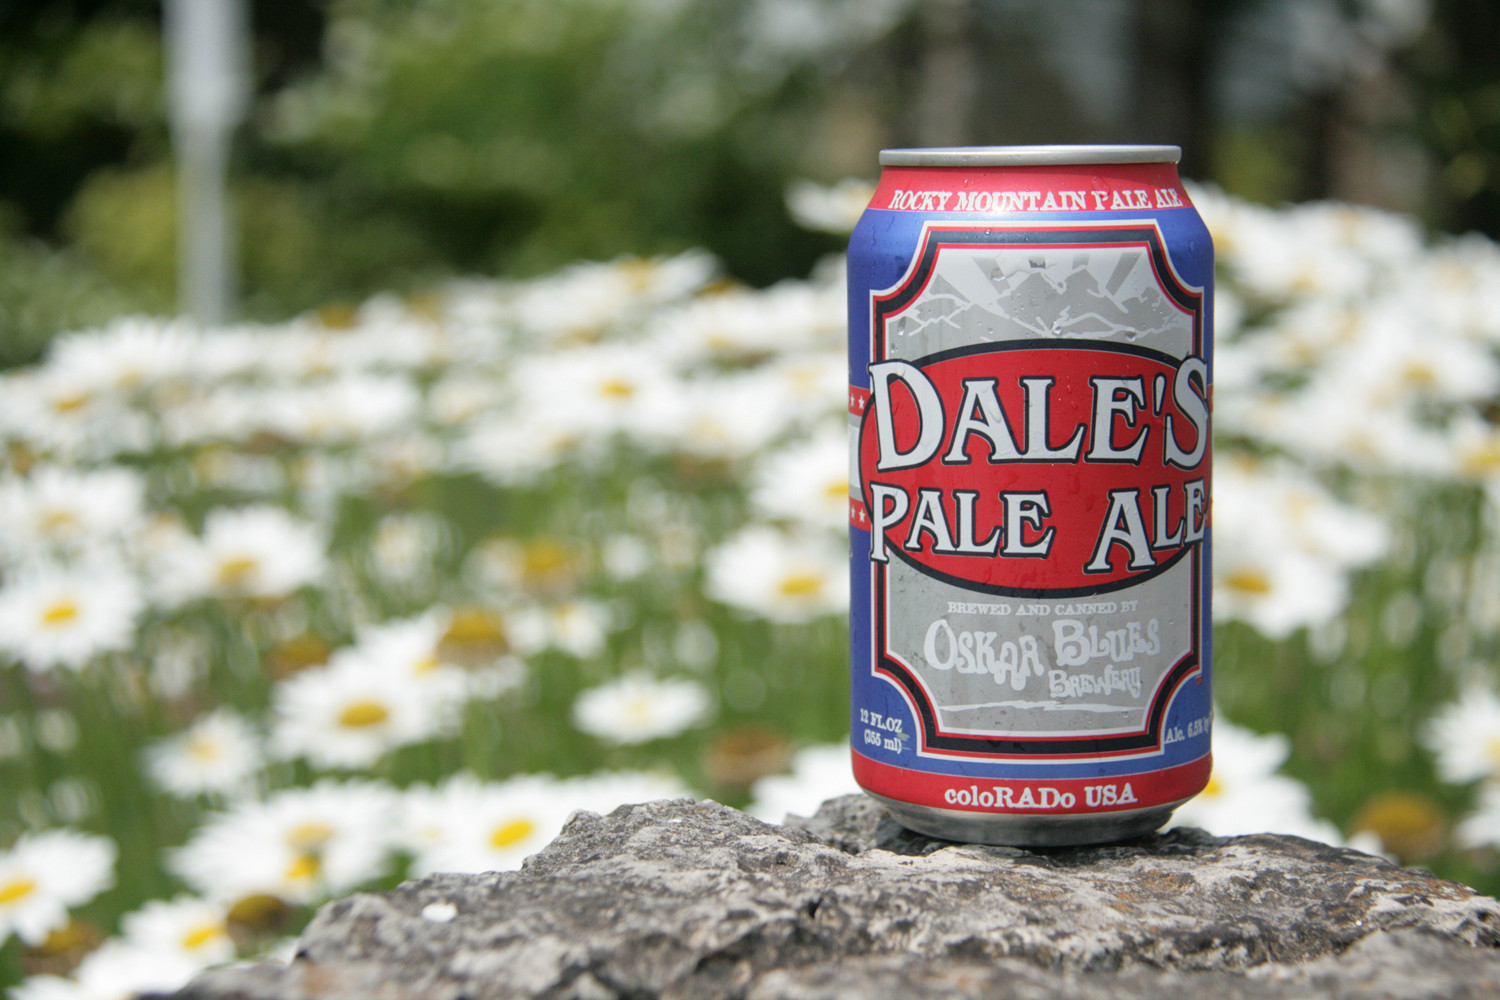 Drink Dale's Pale Ale this summer for classic perfection.